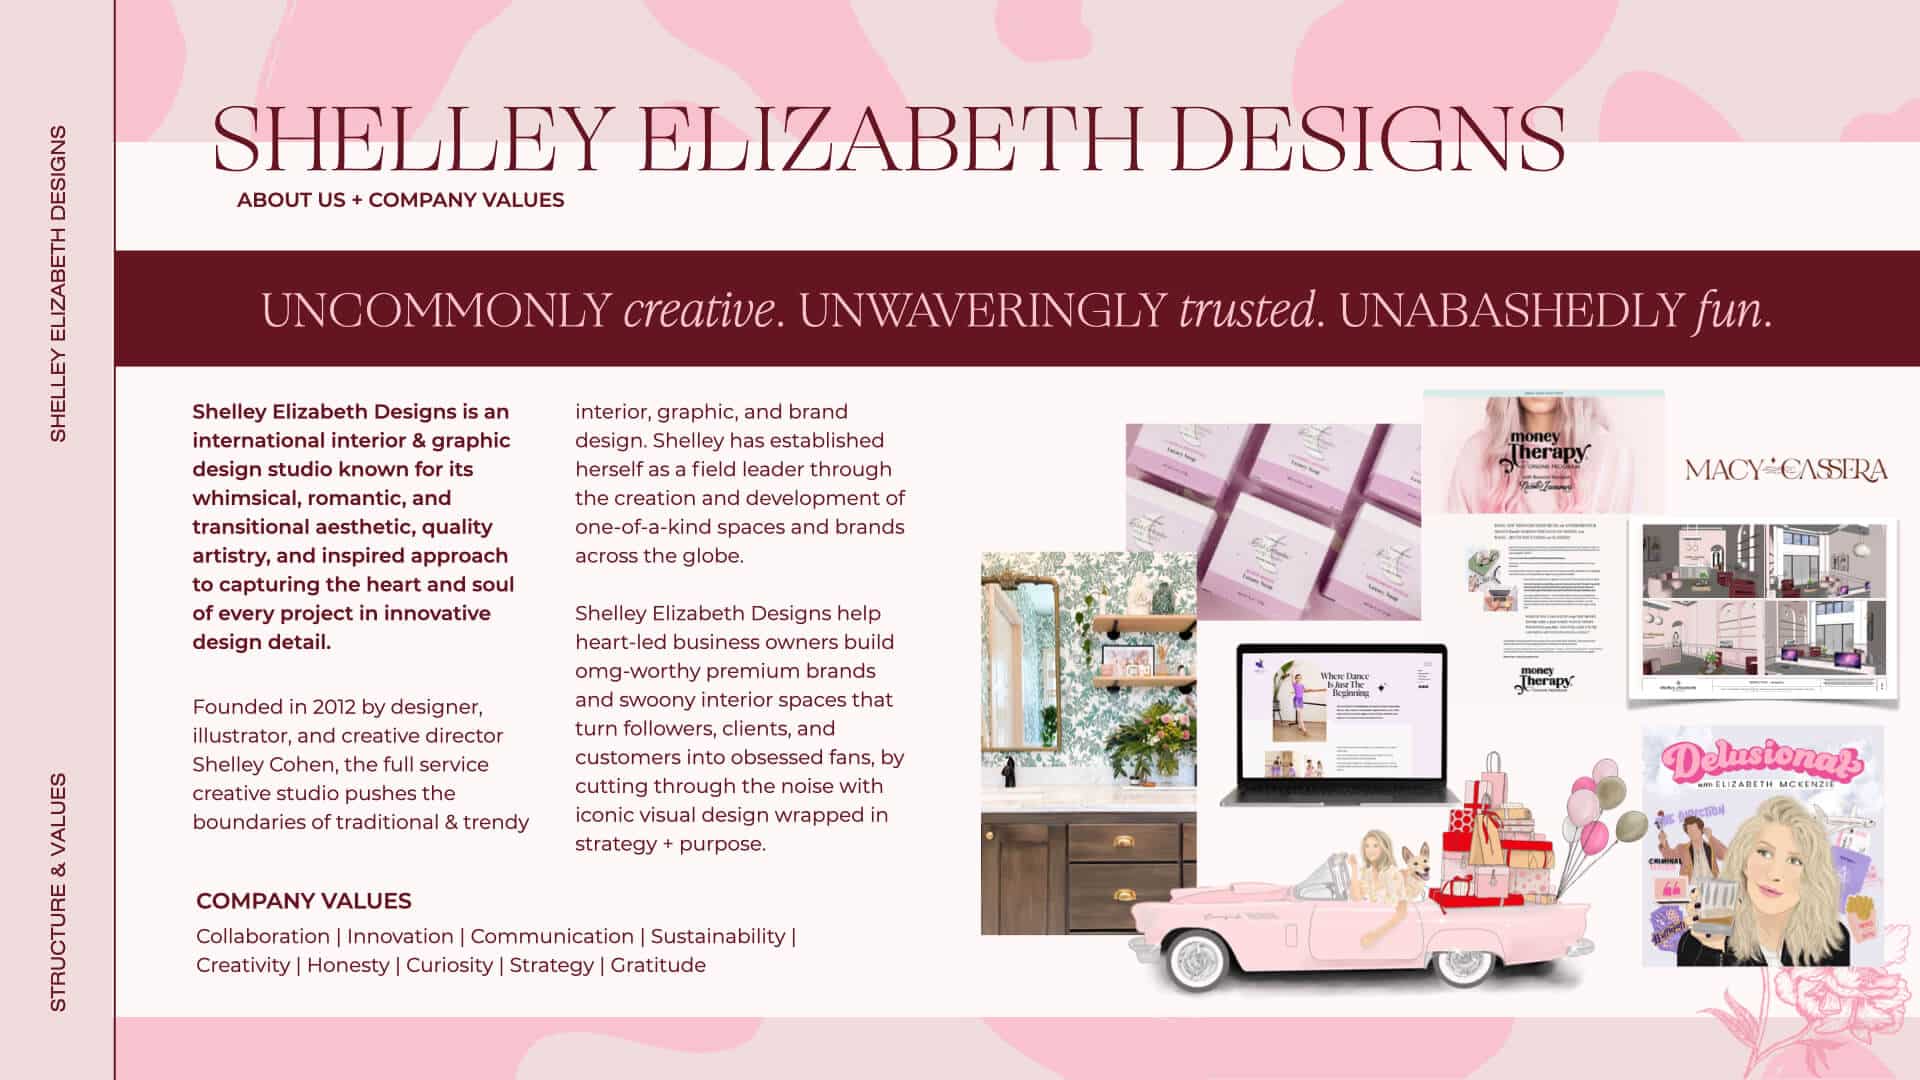 About Shelley Elizabeth Designs - We're hiring a Junior Design Assistant in China